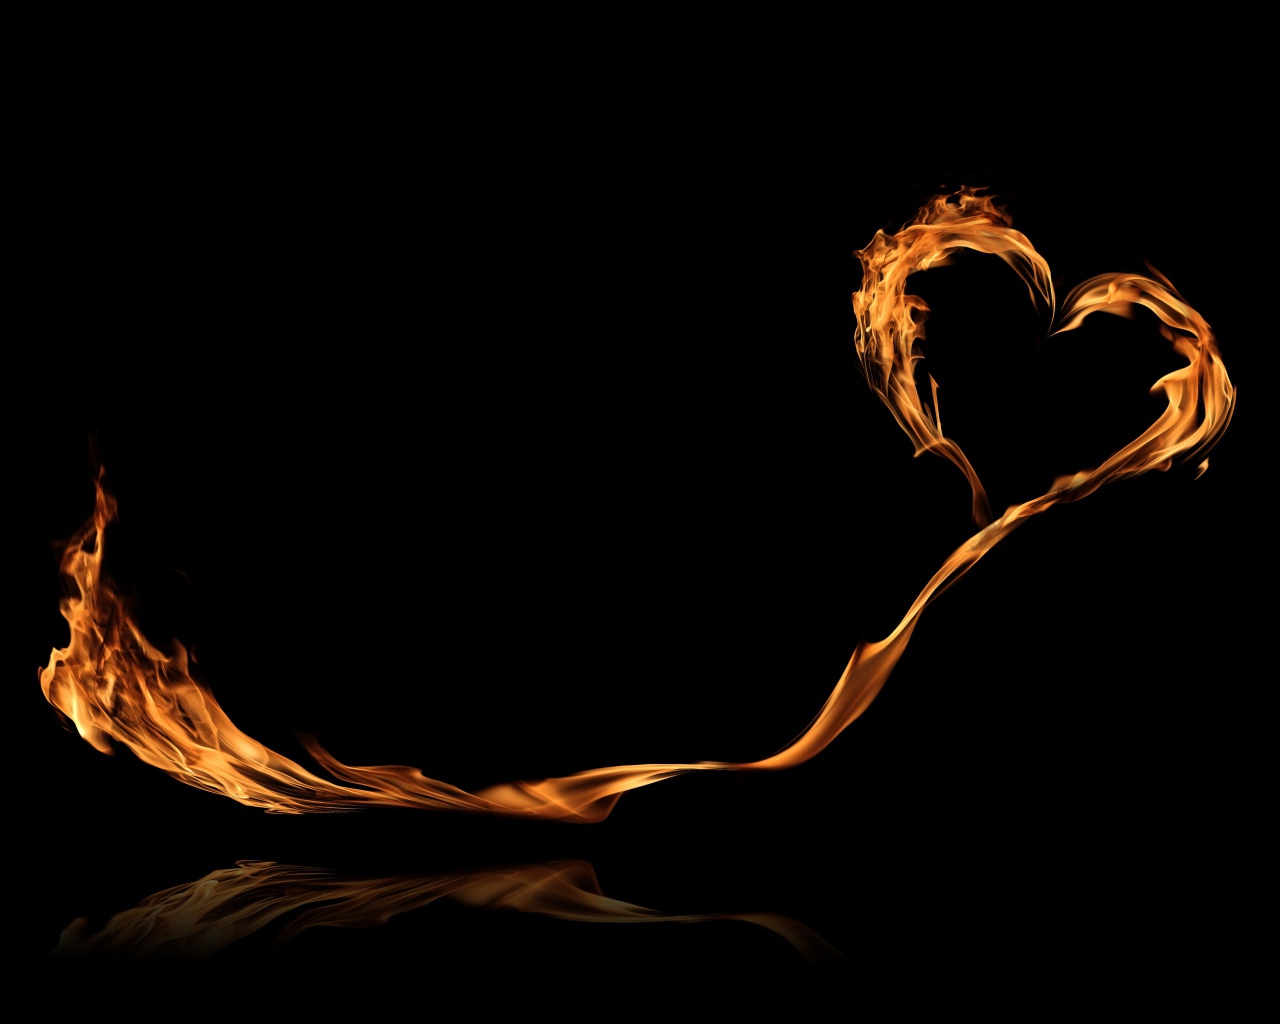 Bright fiery heart with a long tail on a black background